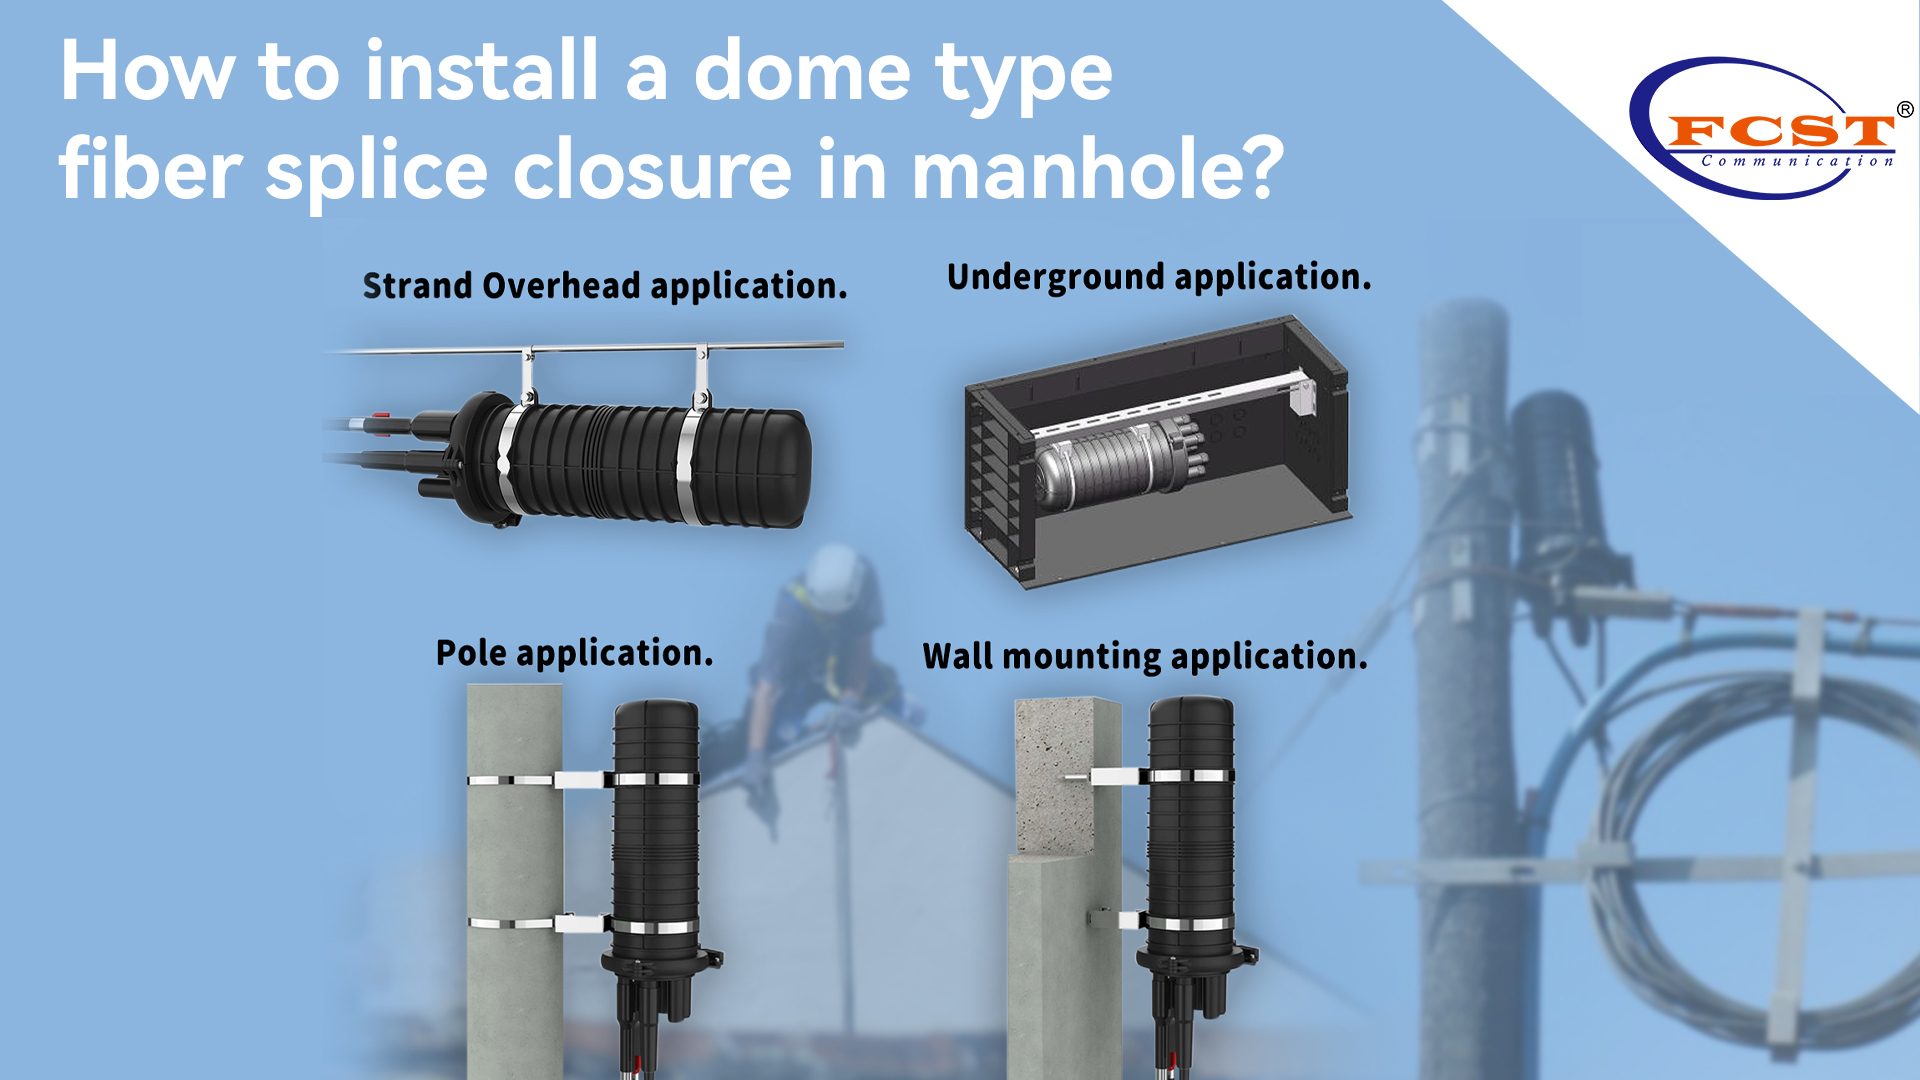 How to install a dome type fiber splice closure in manhole?